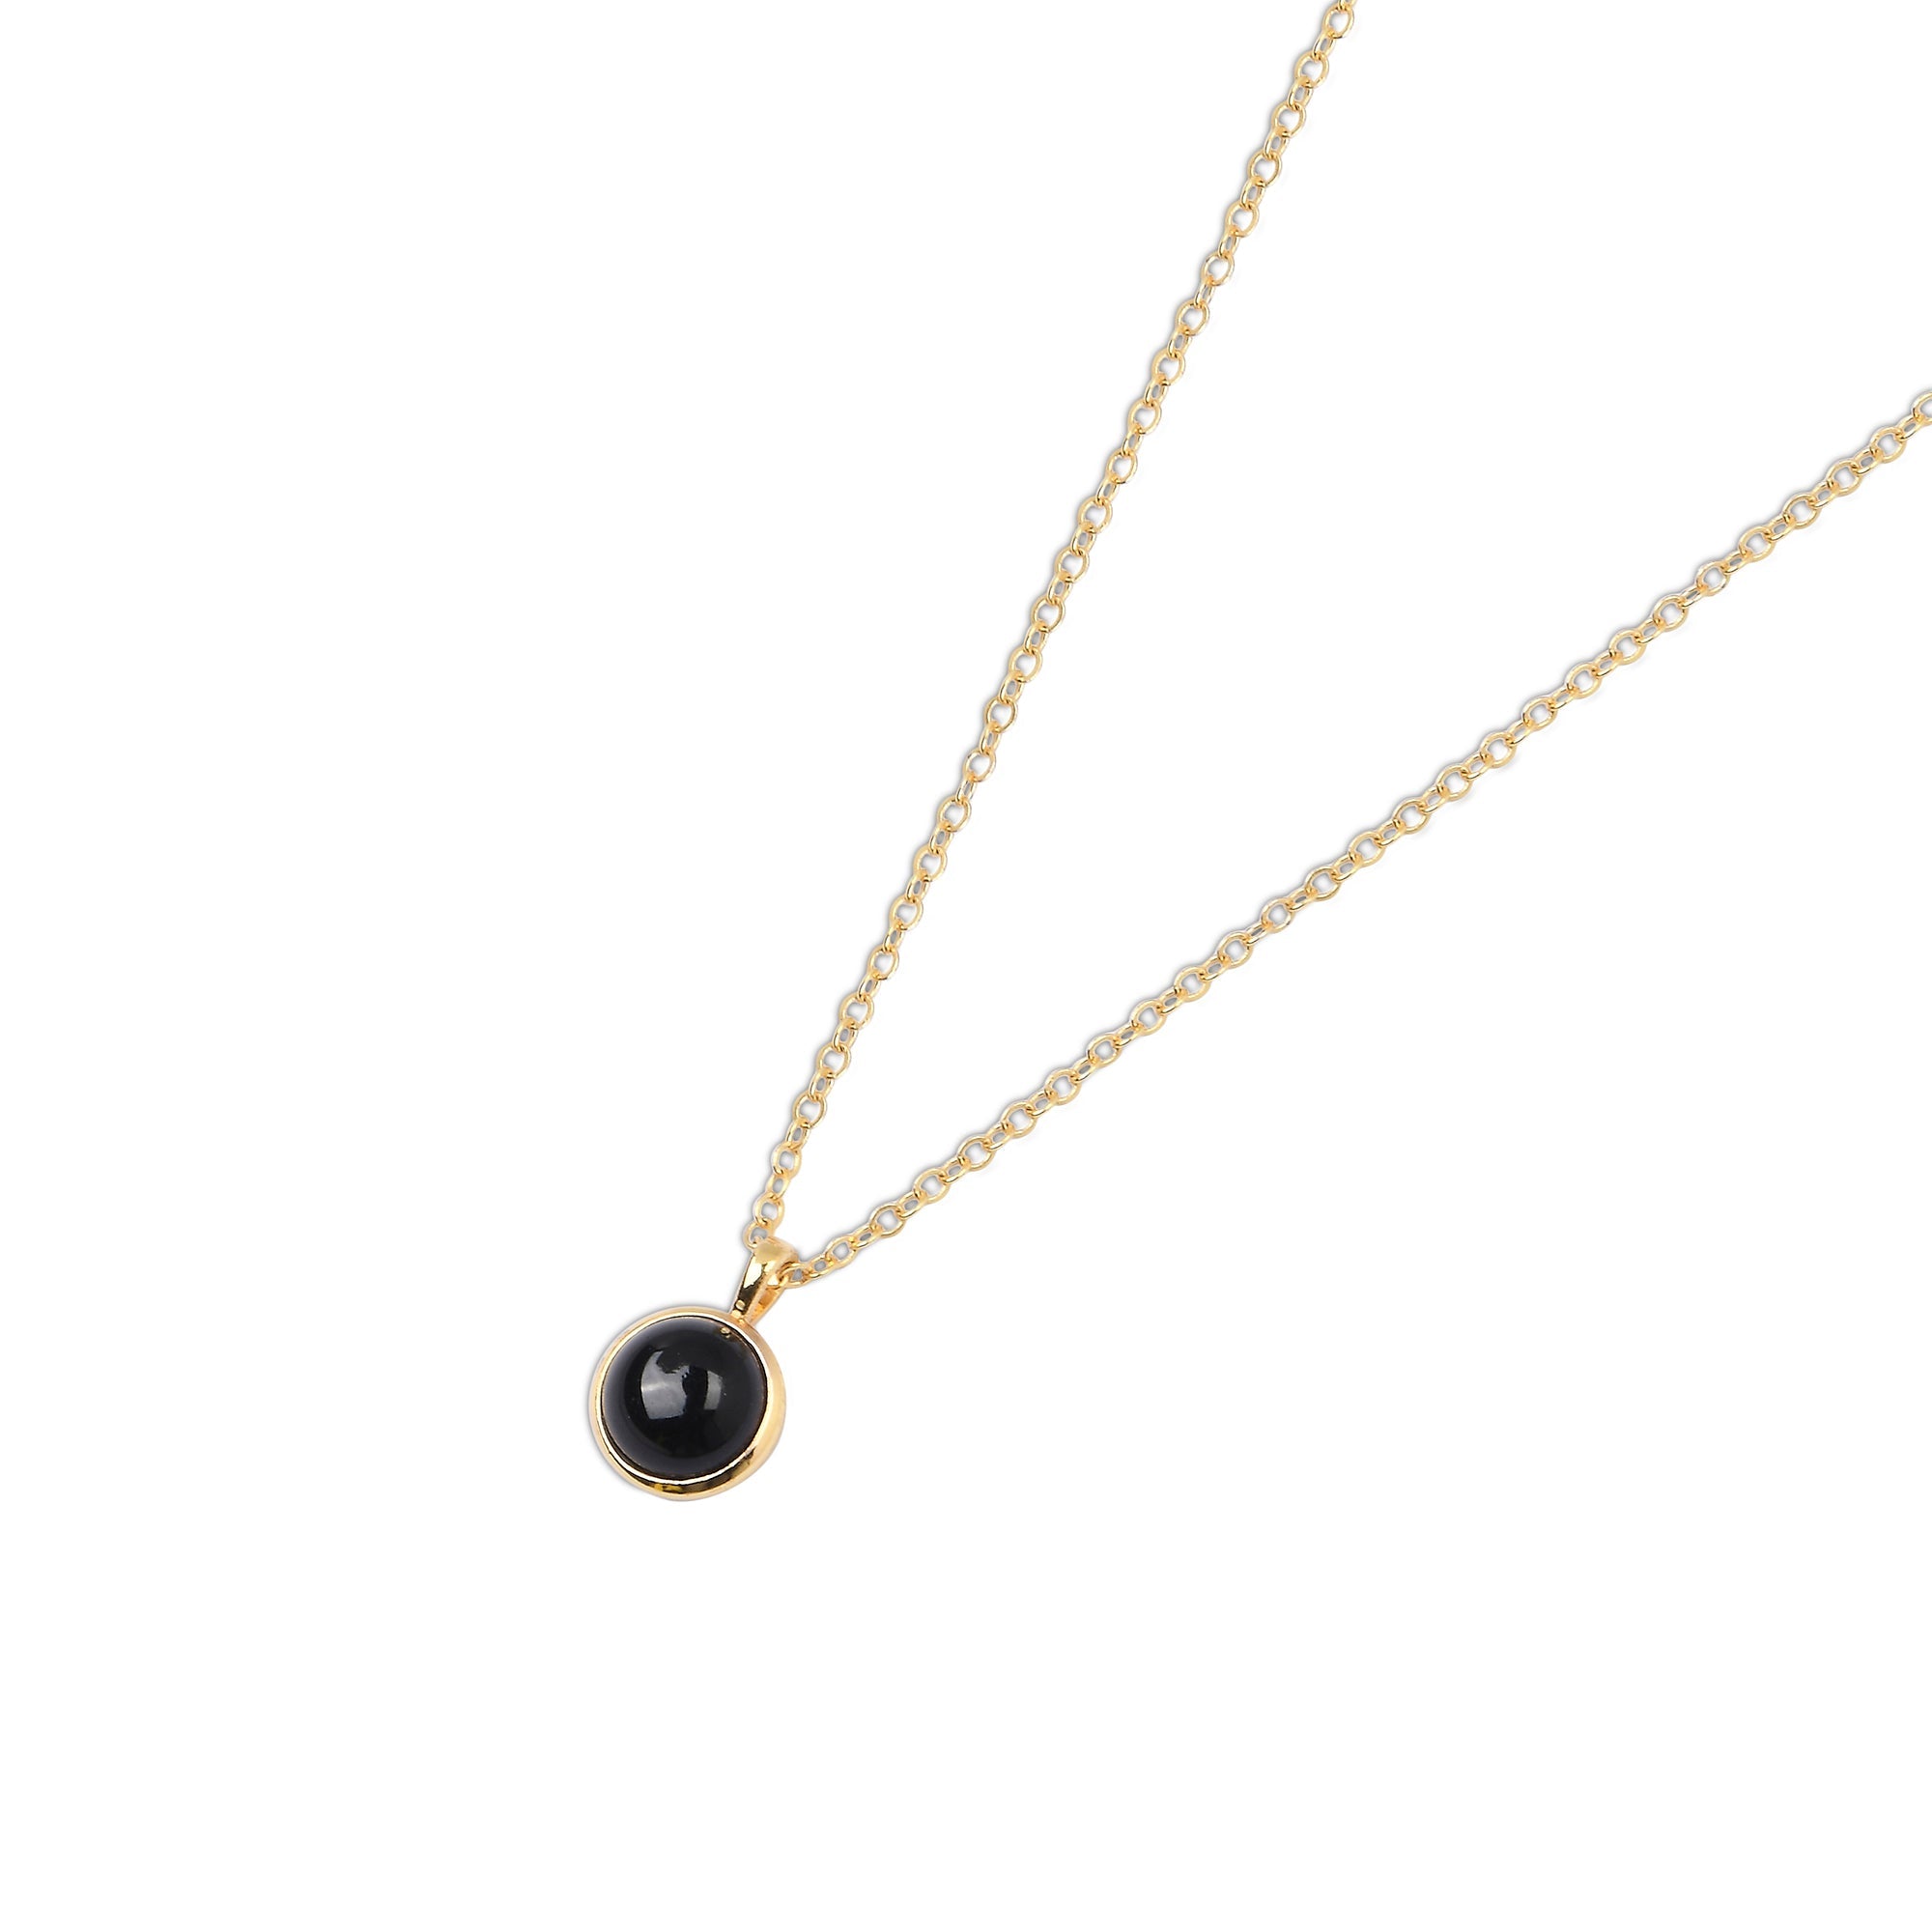 Real Gold Plated Z Black Onyx Pendant Necklace